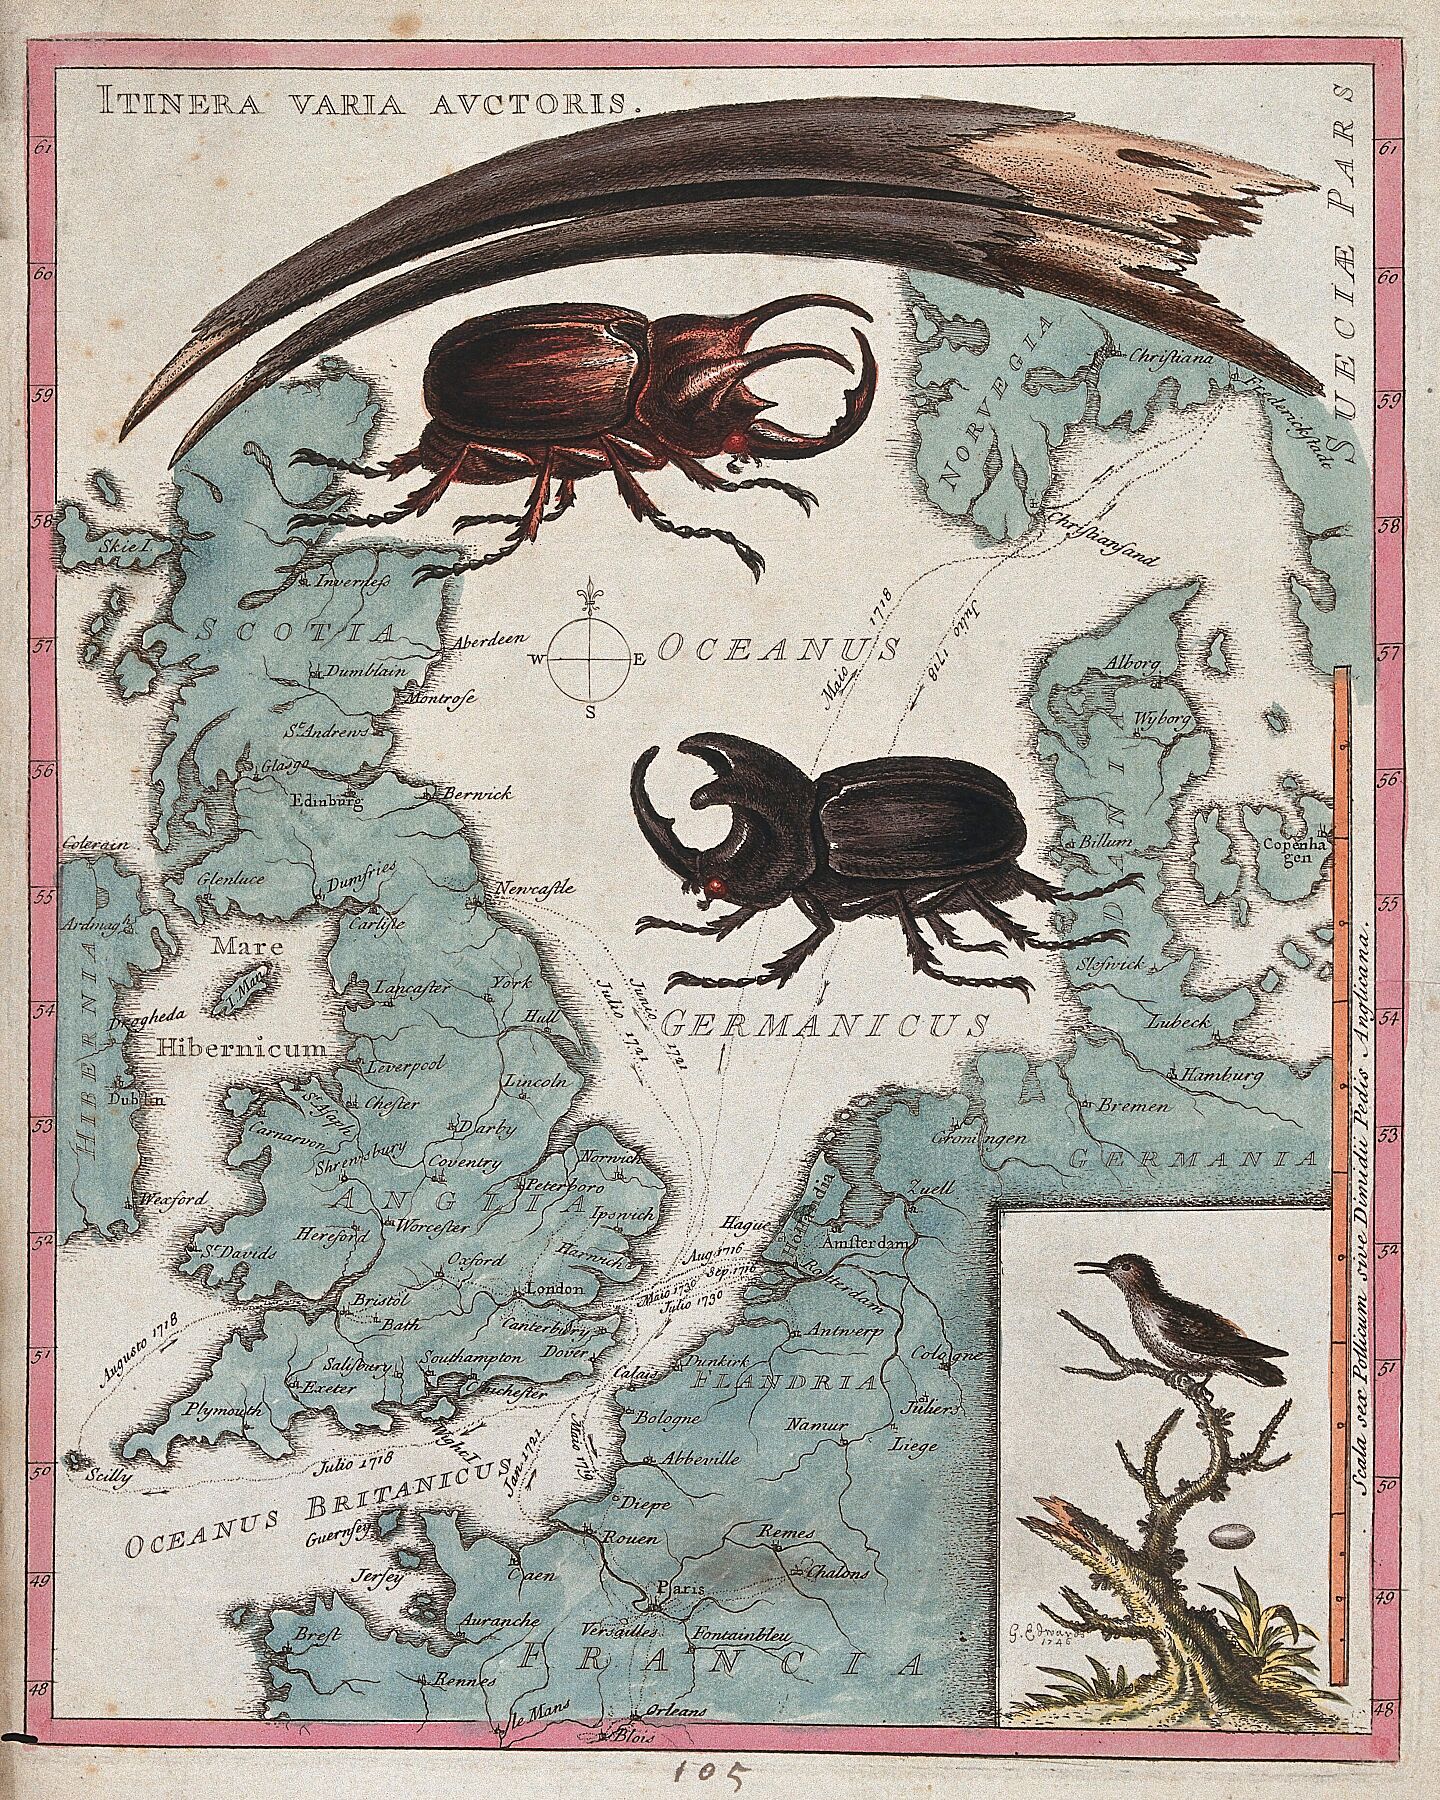 Two stag beetles crawling over a map of the world underneath a large mandible. Coloured etching by George Edwards, 1694-1773